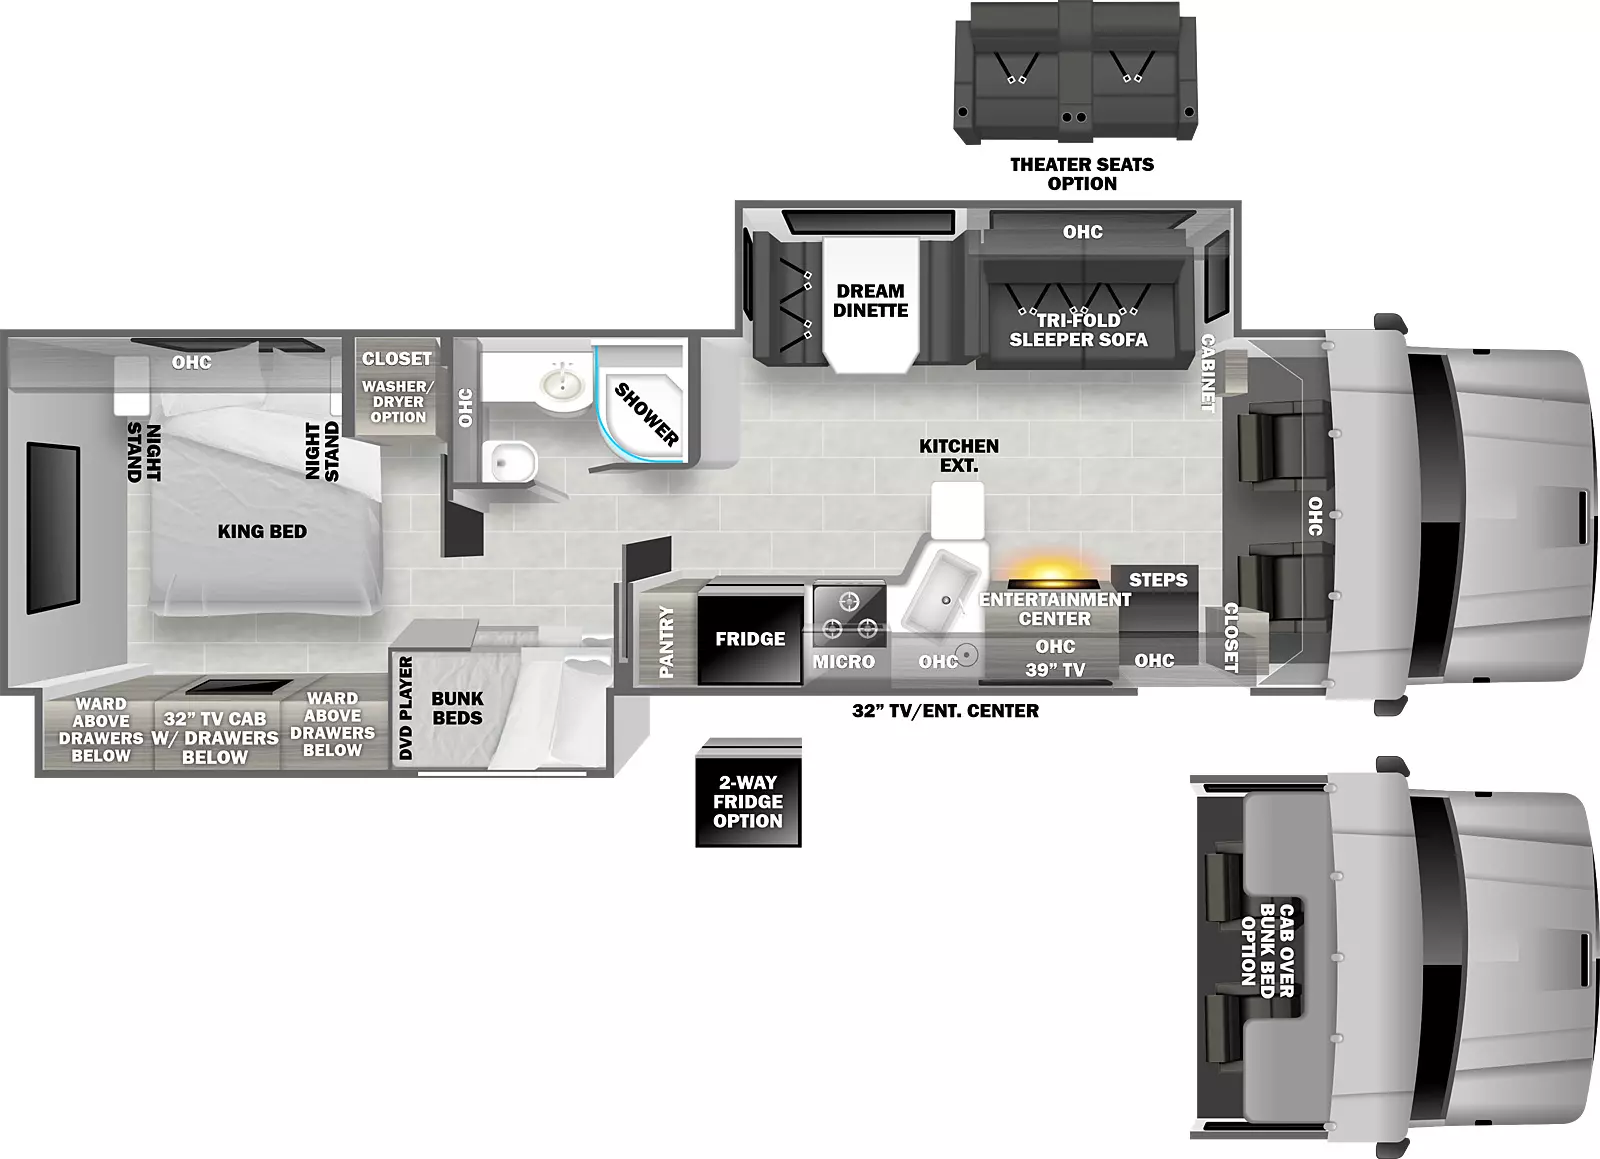 The 3700BD has 2 slide-outs; 1 off-door side, 1 door side. Entry door and TV on door side exterior. Interior layout from front to back: Cab overhead cabinet; off-door slide out with sleeper sofa, overhead cabinets and dream dinette; off-door side side aisle full bath, closet washer dryer prep, king bed with night stands on either side, and overhead cabinets; door side closet, entry steps, entertainment center with fireplace below, overhead cabinets, kitchen with double basin sink, countertop extension, cook top stove, microwave, refrigerator and pantry; door side slide out with bunk beds with DVD players, wardrobe with drawers, and TV cabinet with drawers below; optional theater seats in place of sleeper sofa, optional two-way refrigerator in place of standard refrigerator, and optional cab over bunk bed in place of front overhead cabinets